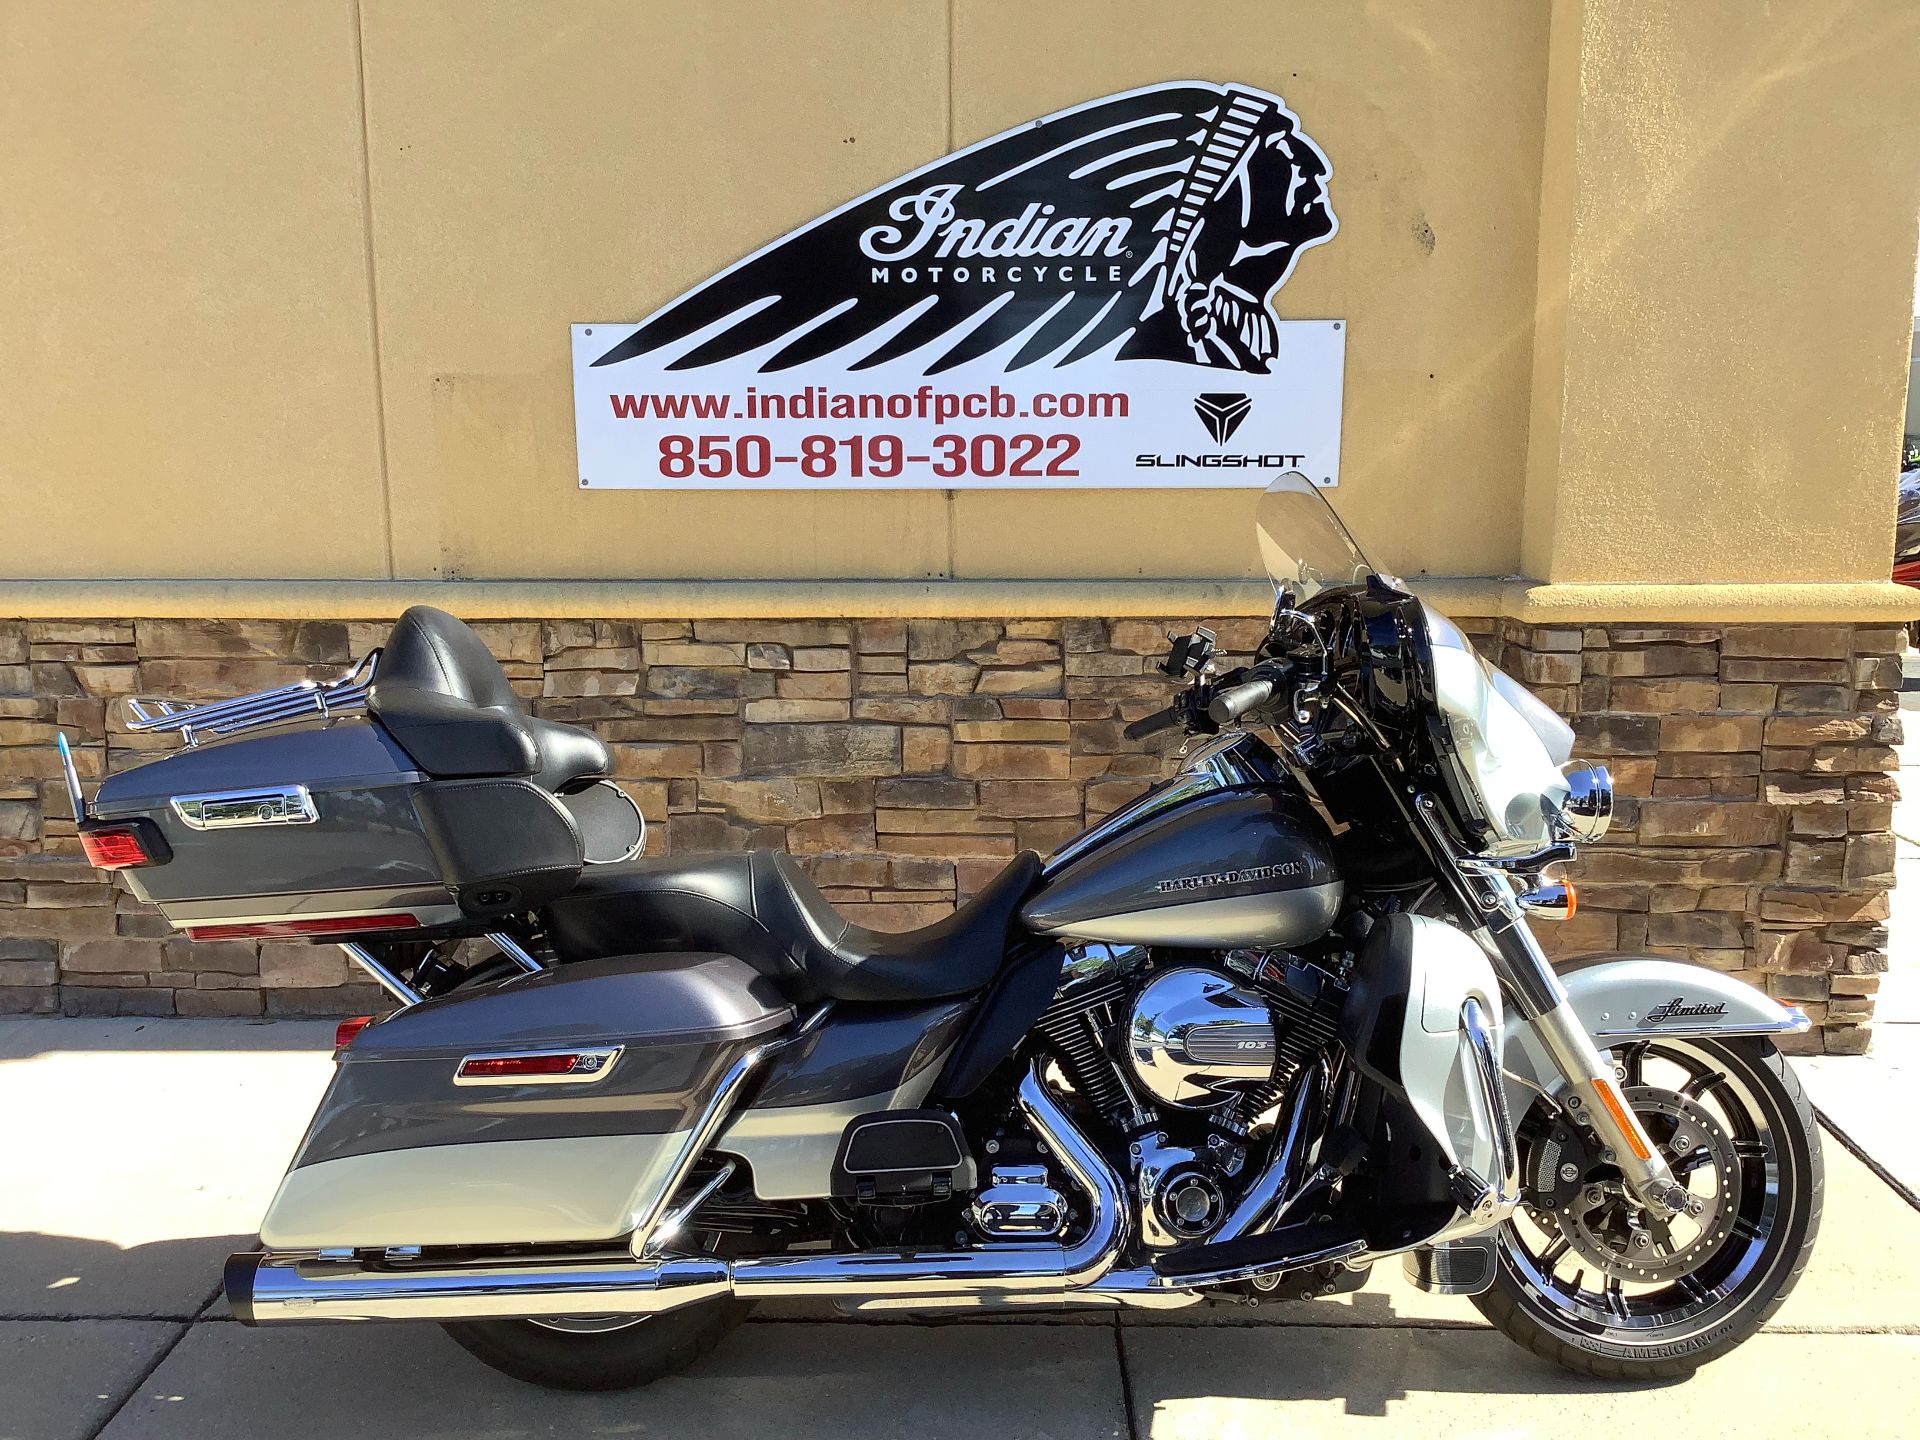 2014 Harley-Davidson ELECTRA GLIDE ULTRA LIMITED TWO TONE in Panama City Beach, Florida - Photo 1